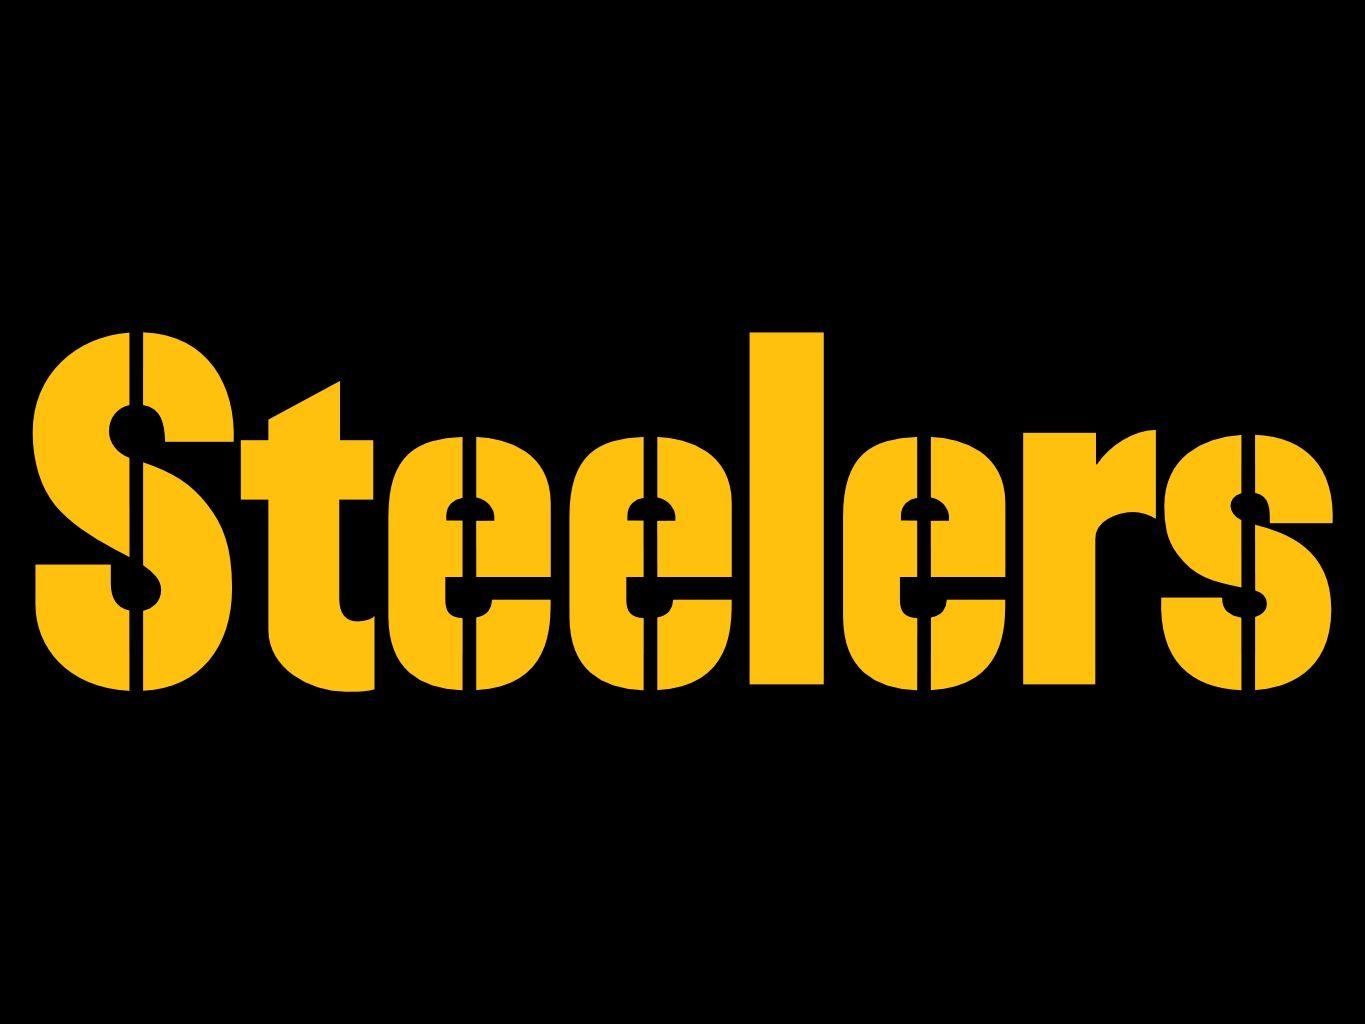 Black and Yellow Steelers Logo - Free Pittsburgh Steelers Logo, Download Free Clip Art, Free Clip Art